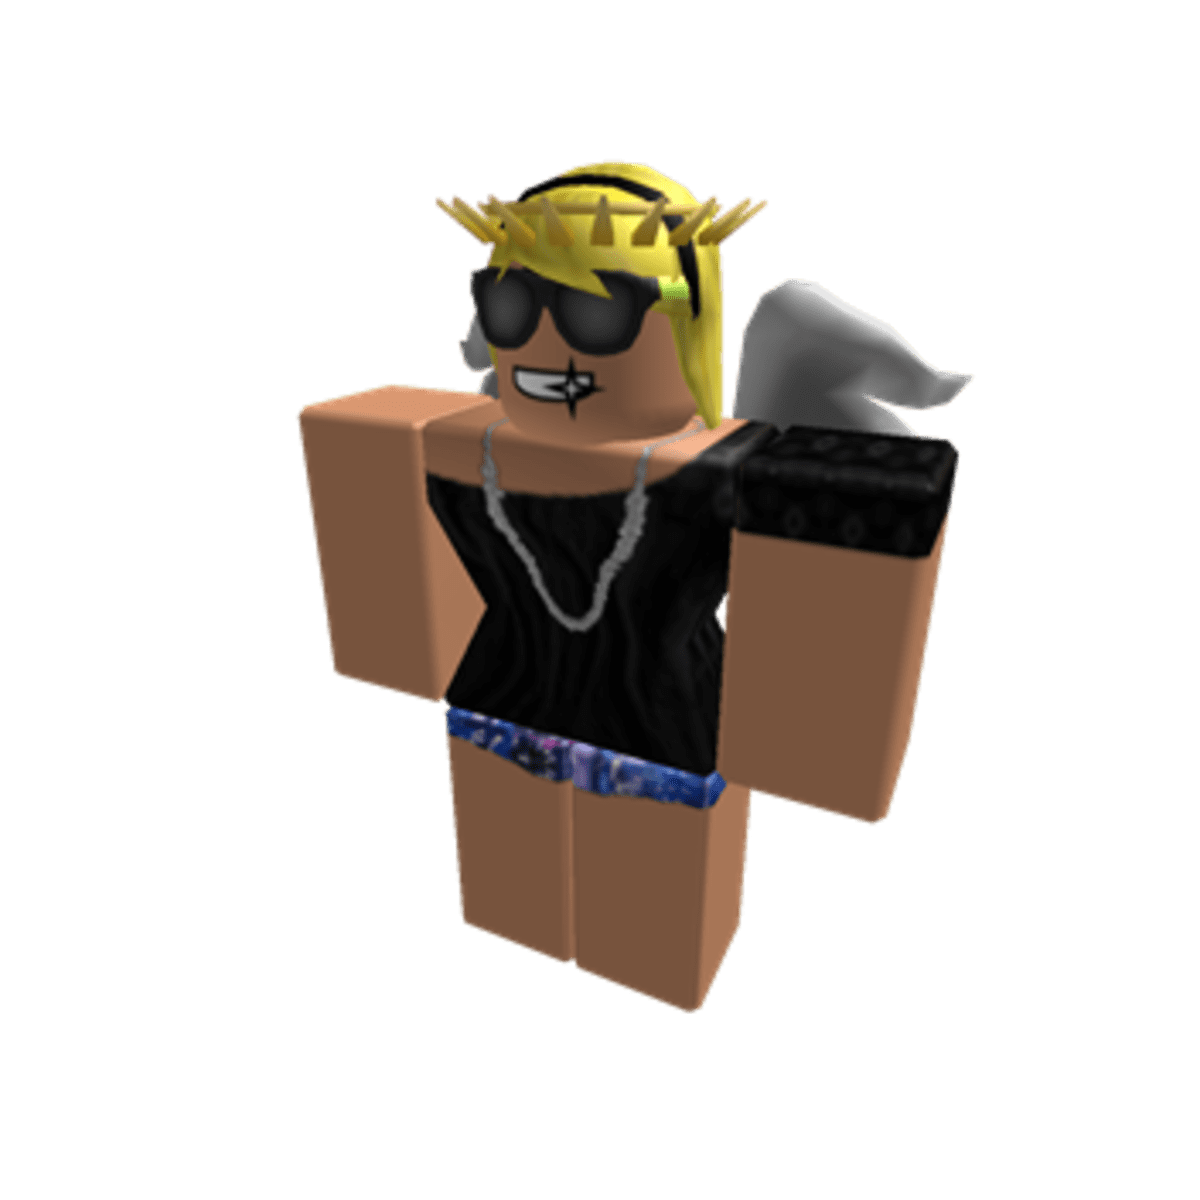 Roblox Guest in 2022. #1 